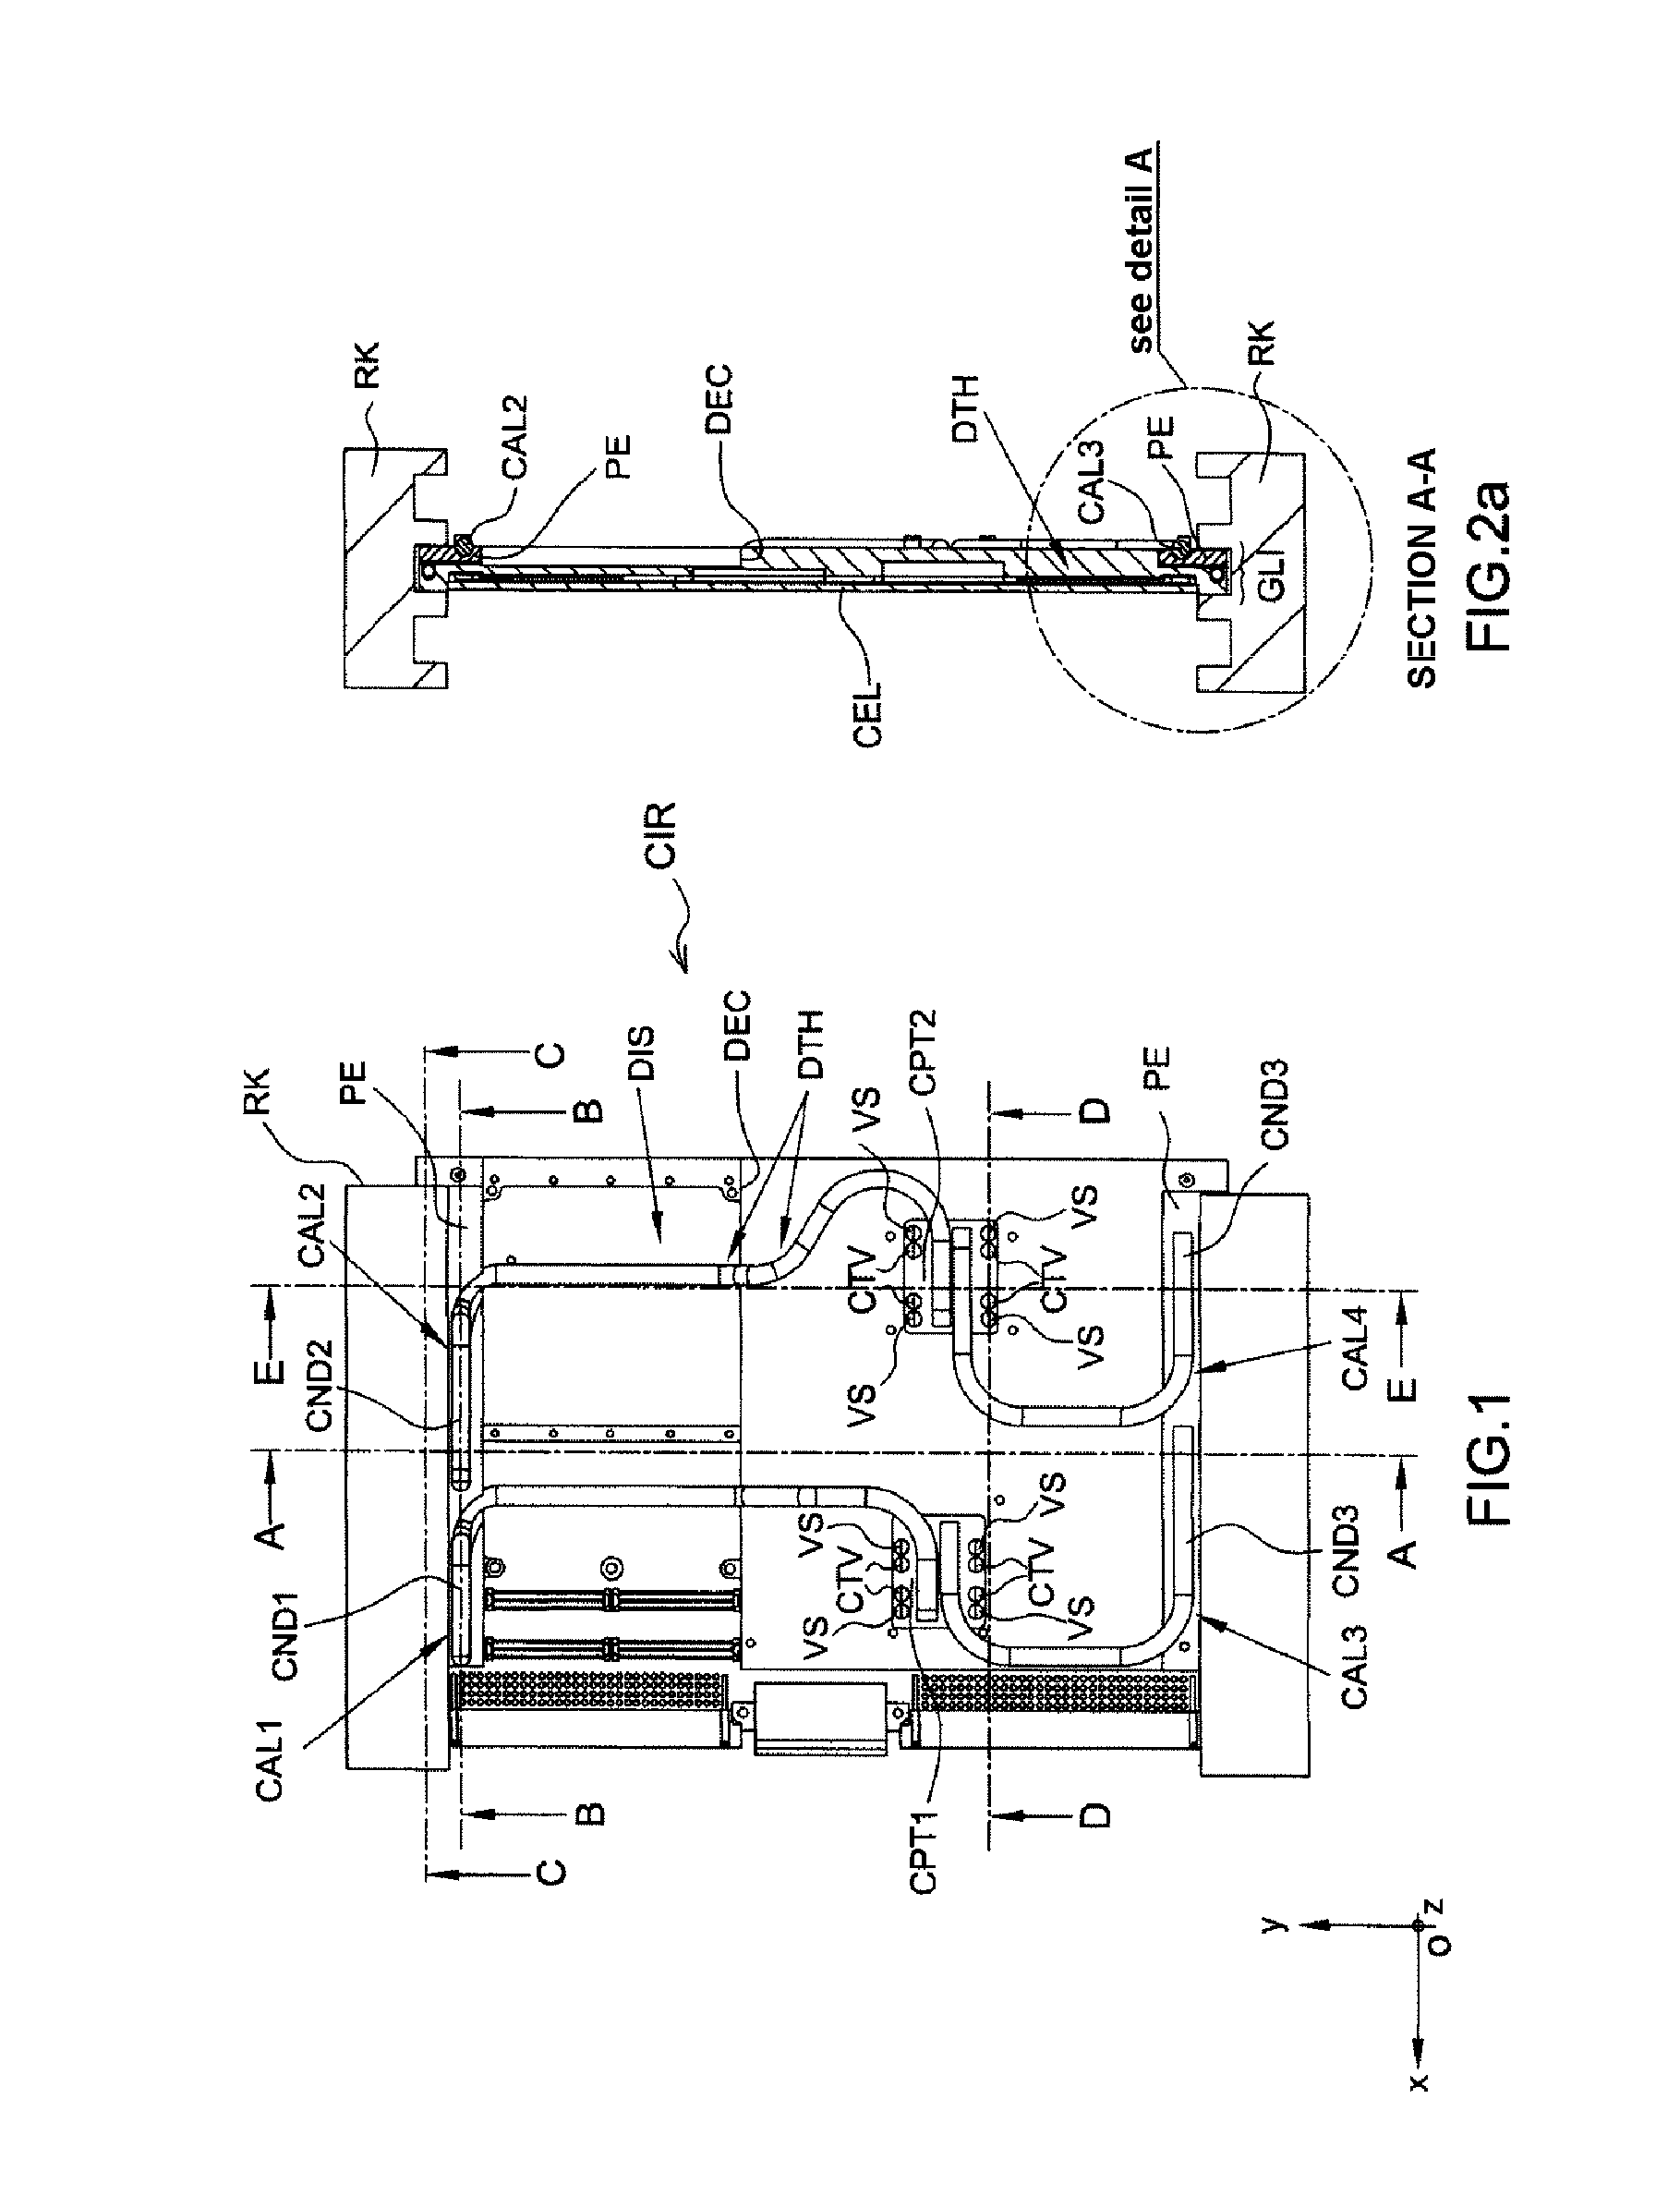 Device for cooling an electronic card by conduction comprising heat pipes, and corresponding method of fabrication